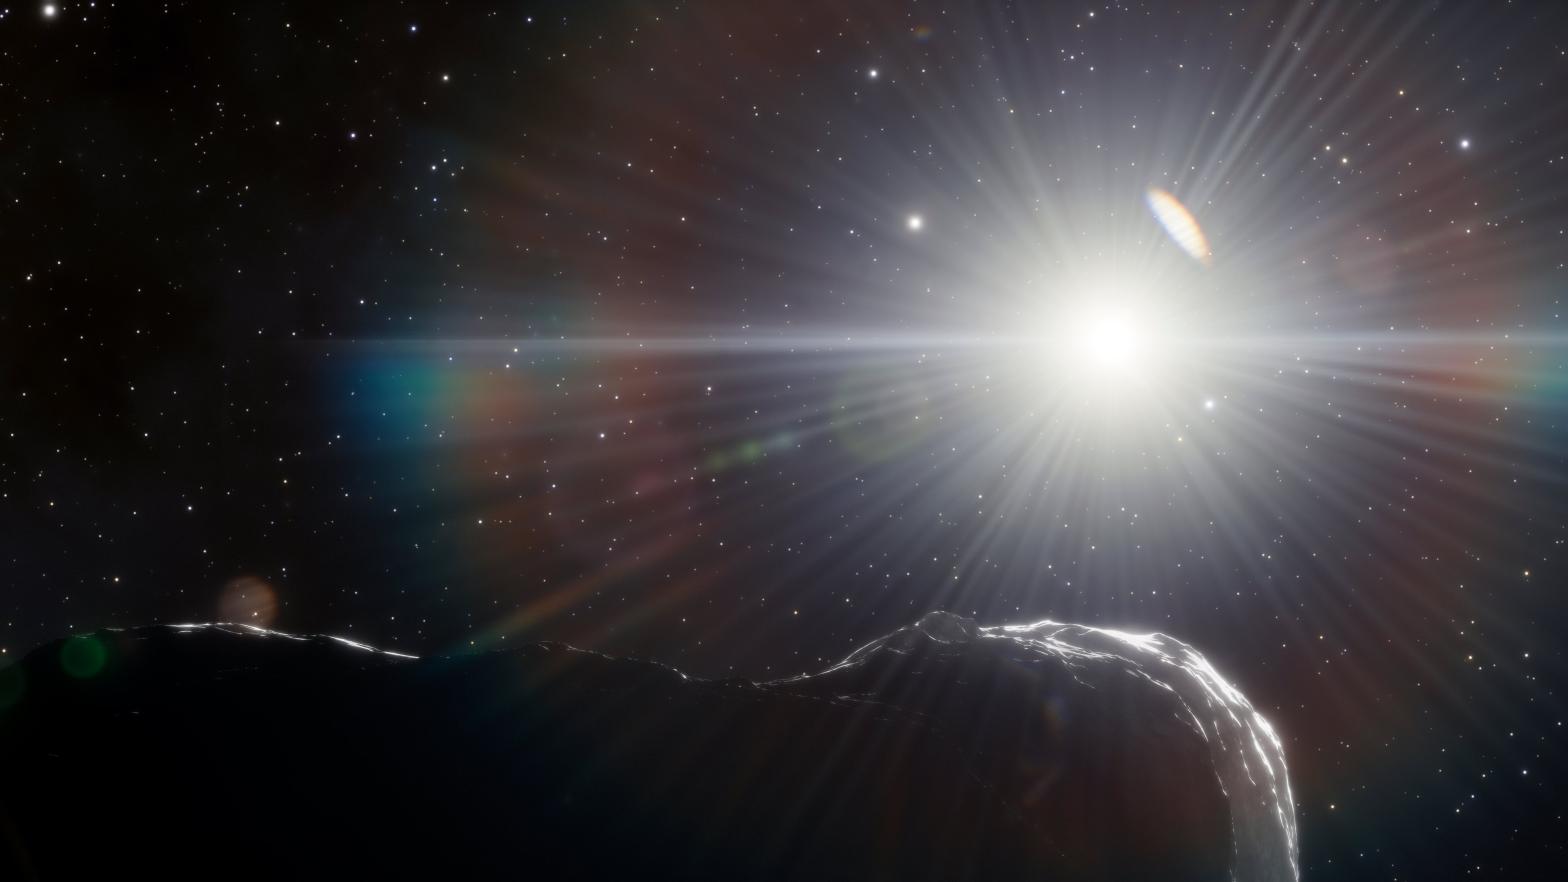 An illustration of an asteroid passing in front of the Sun. (Illustration: Credit: DOE/FNAL/DECam/CTIO/NOIRLab/NSF/AURA/J. da Silva/Spaceengine)